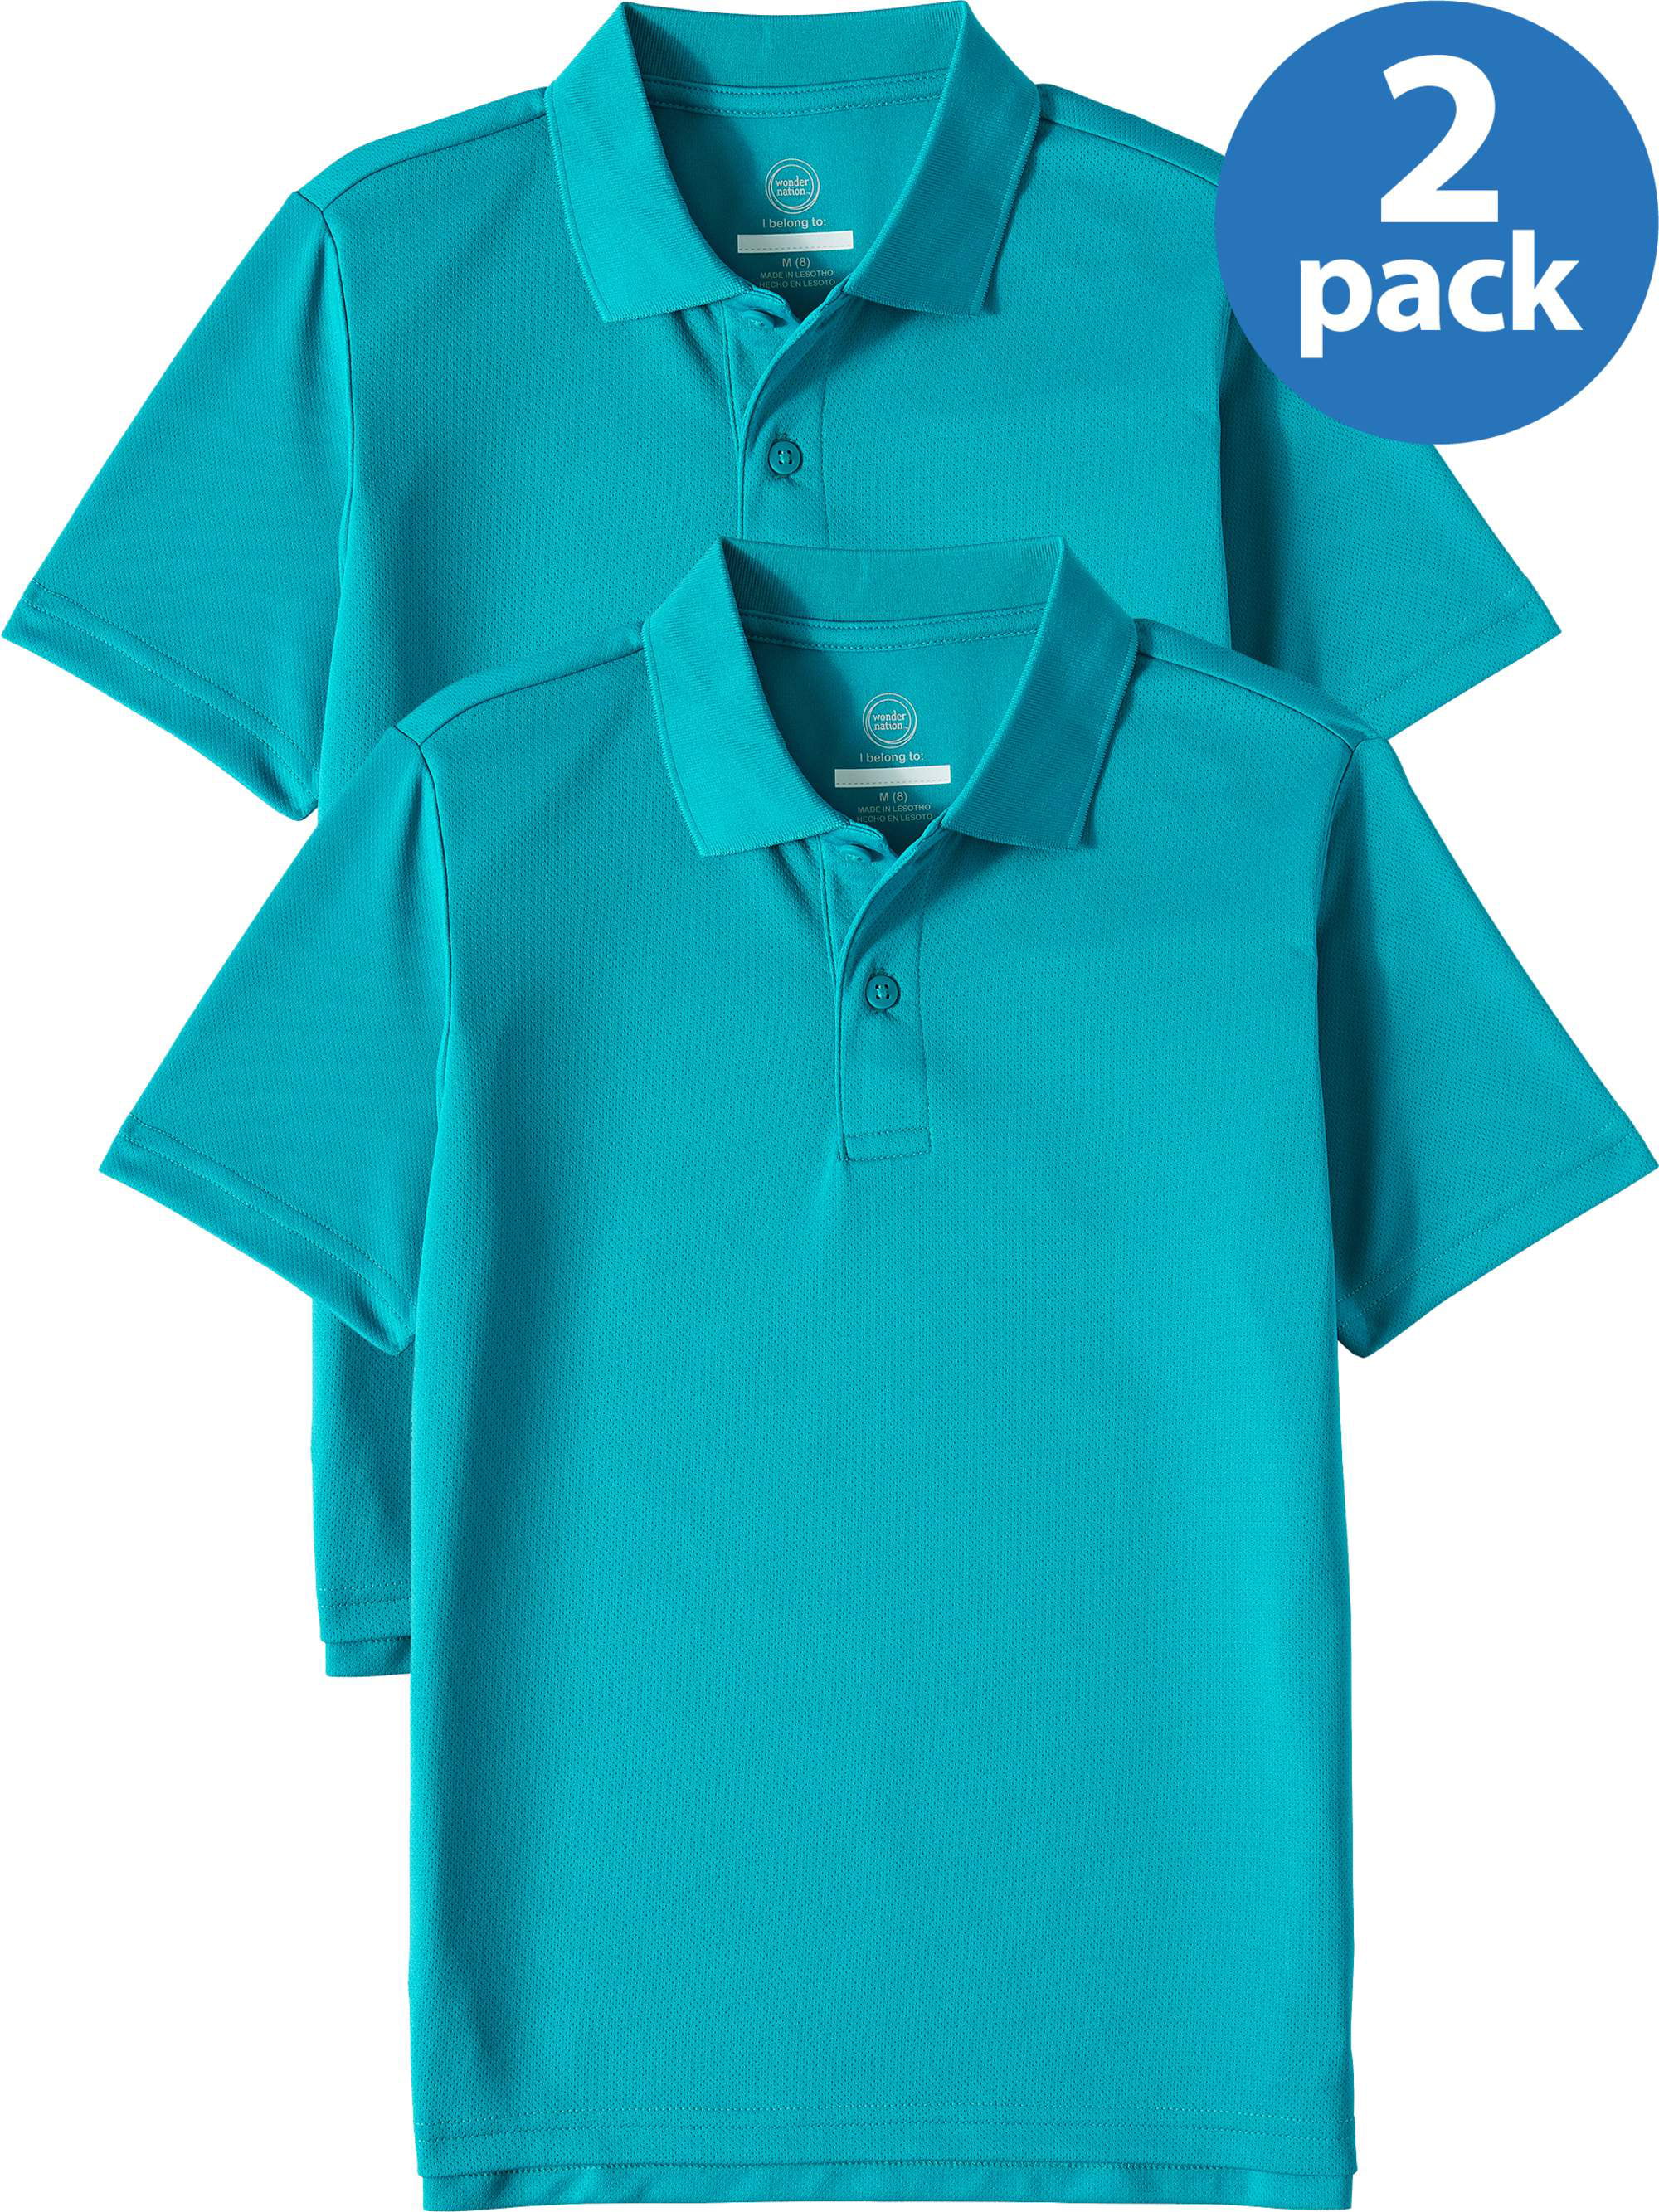 Essentials Boys' 2-Pack Performance Polo 